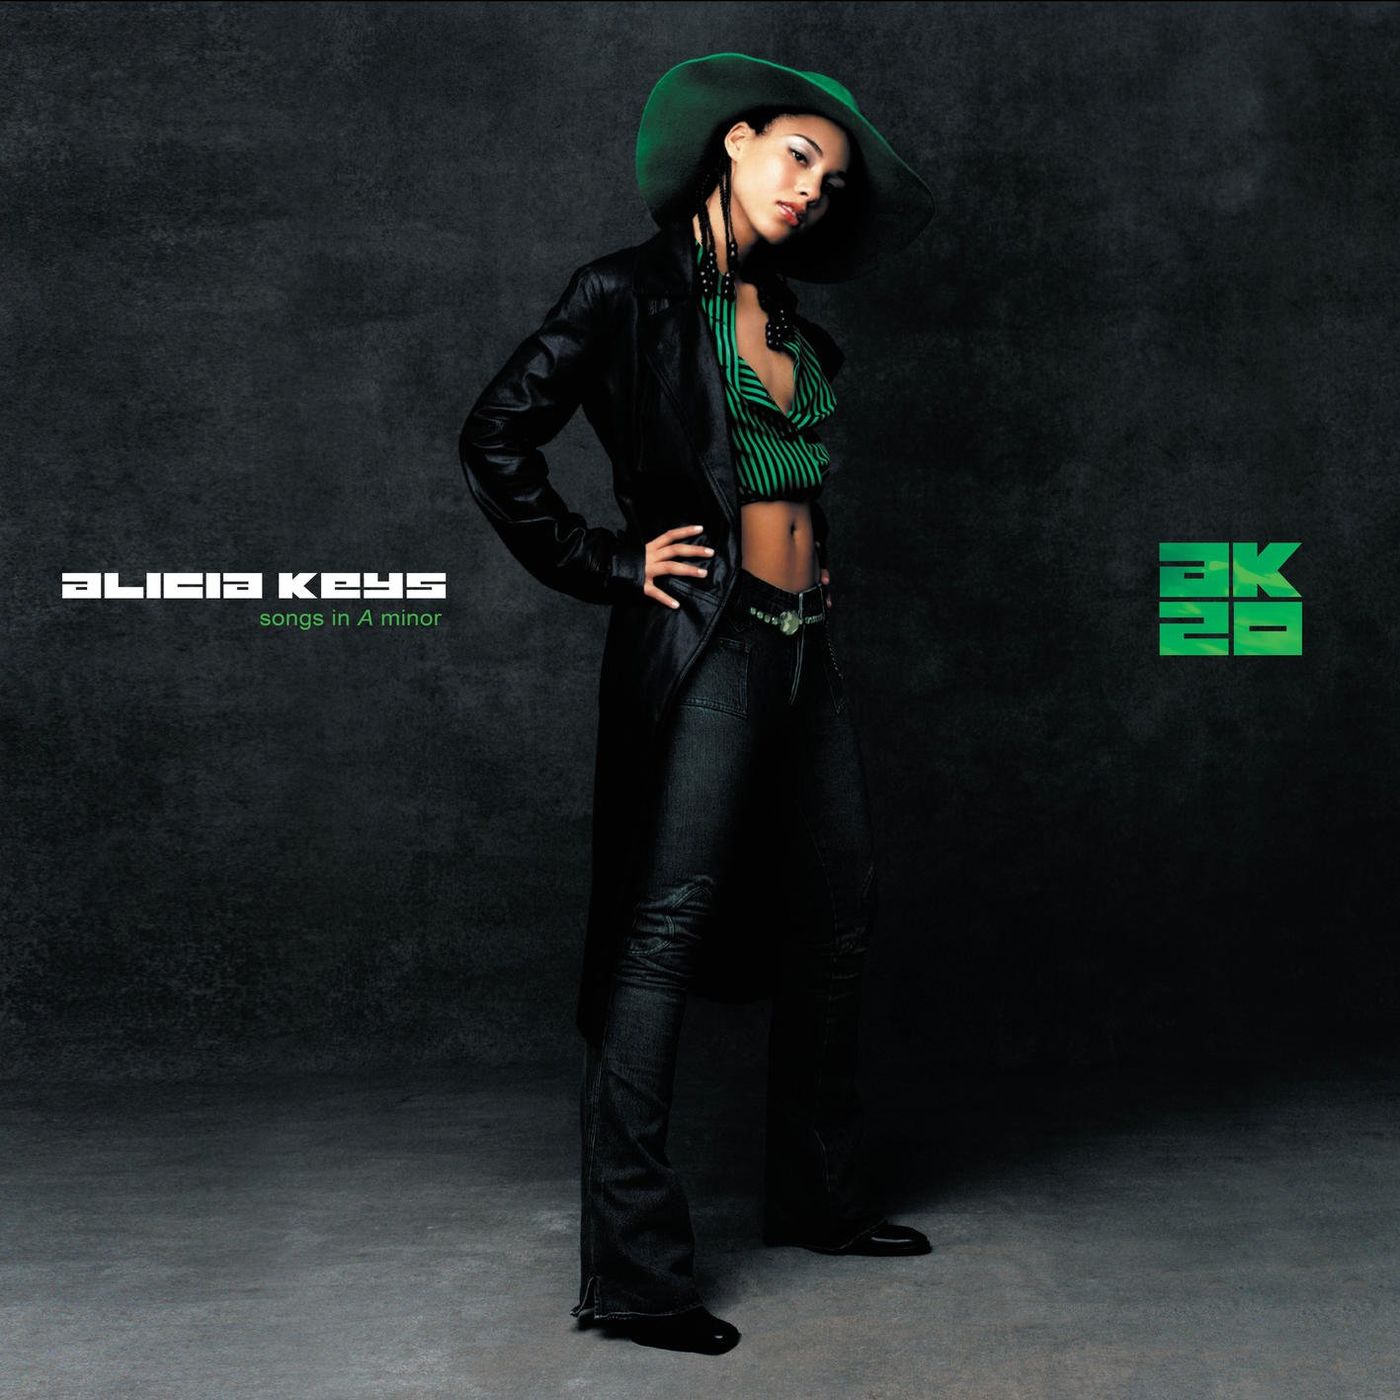 Alicia Keys Discography Flac Torrent